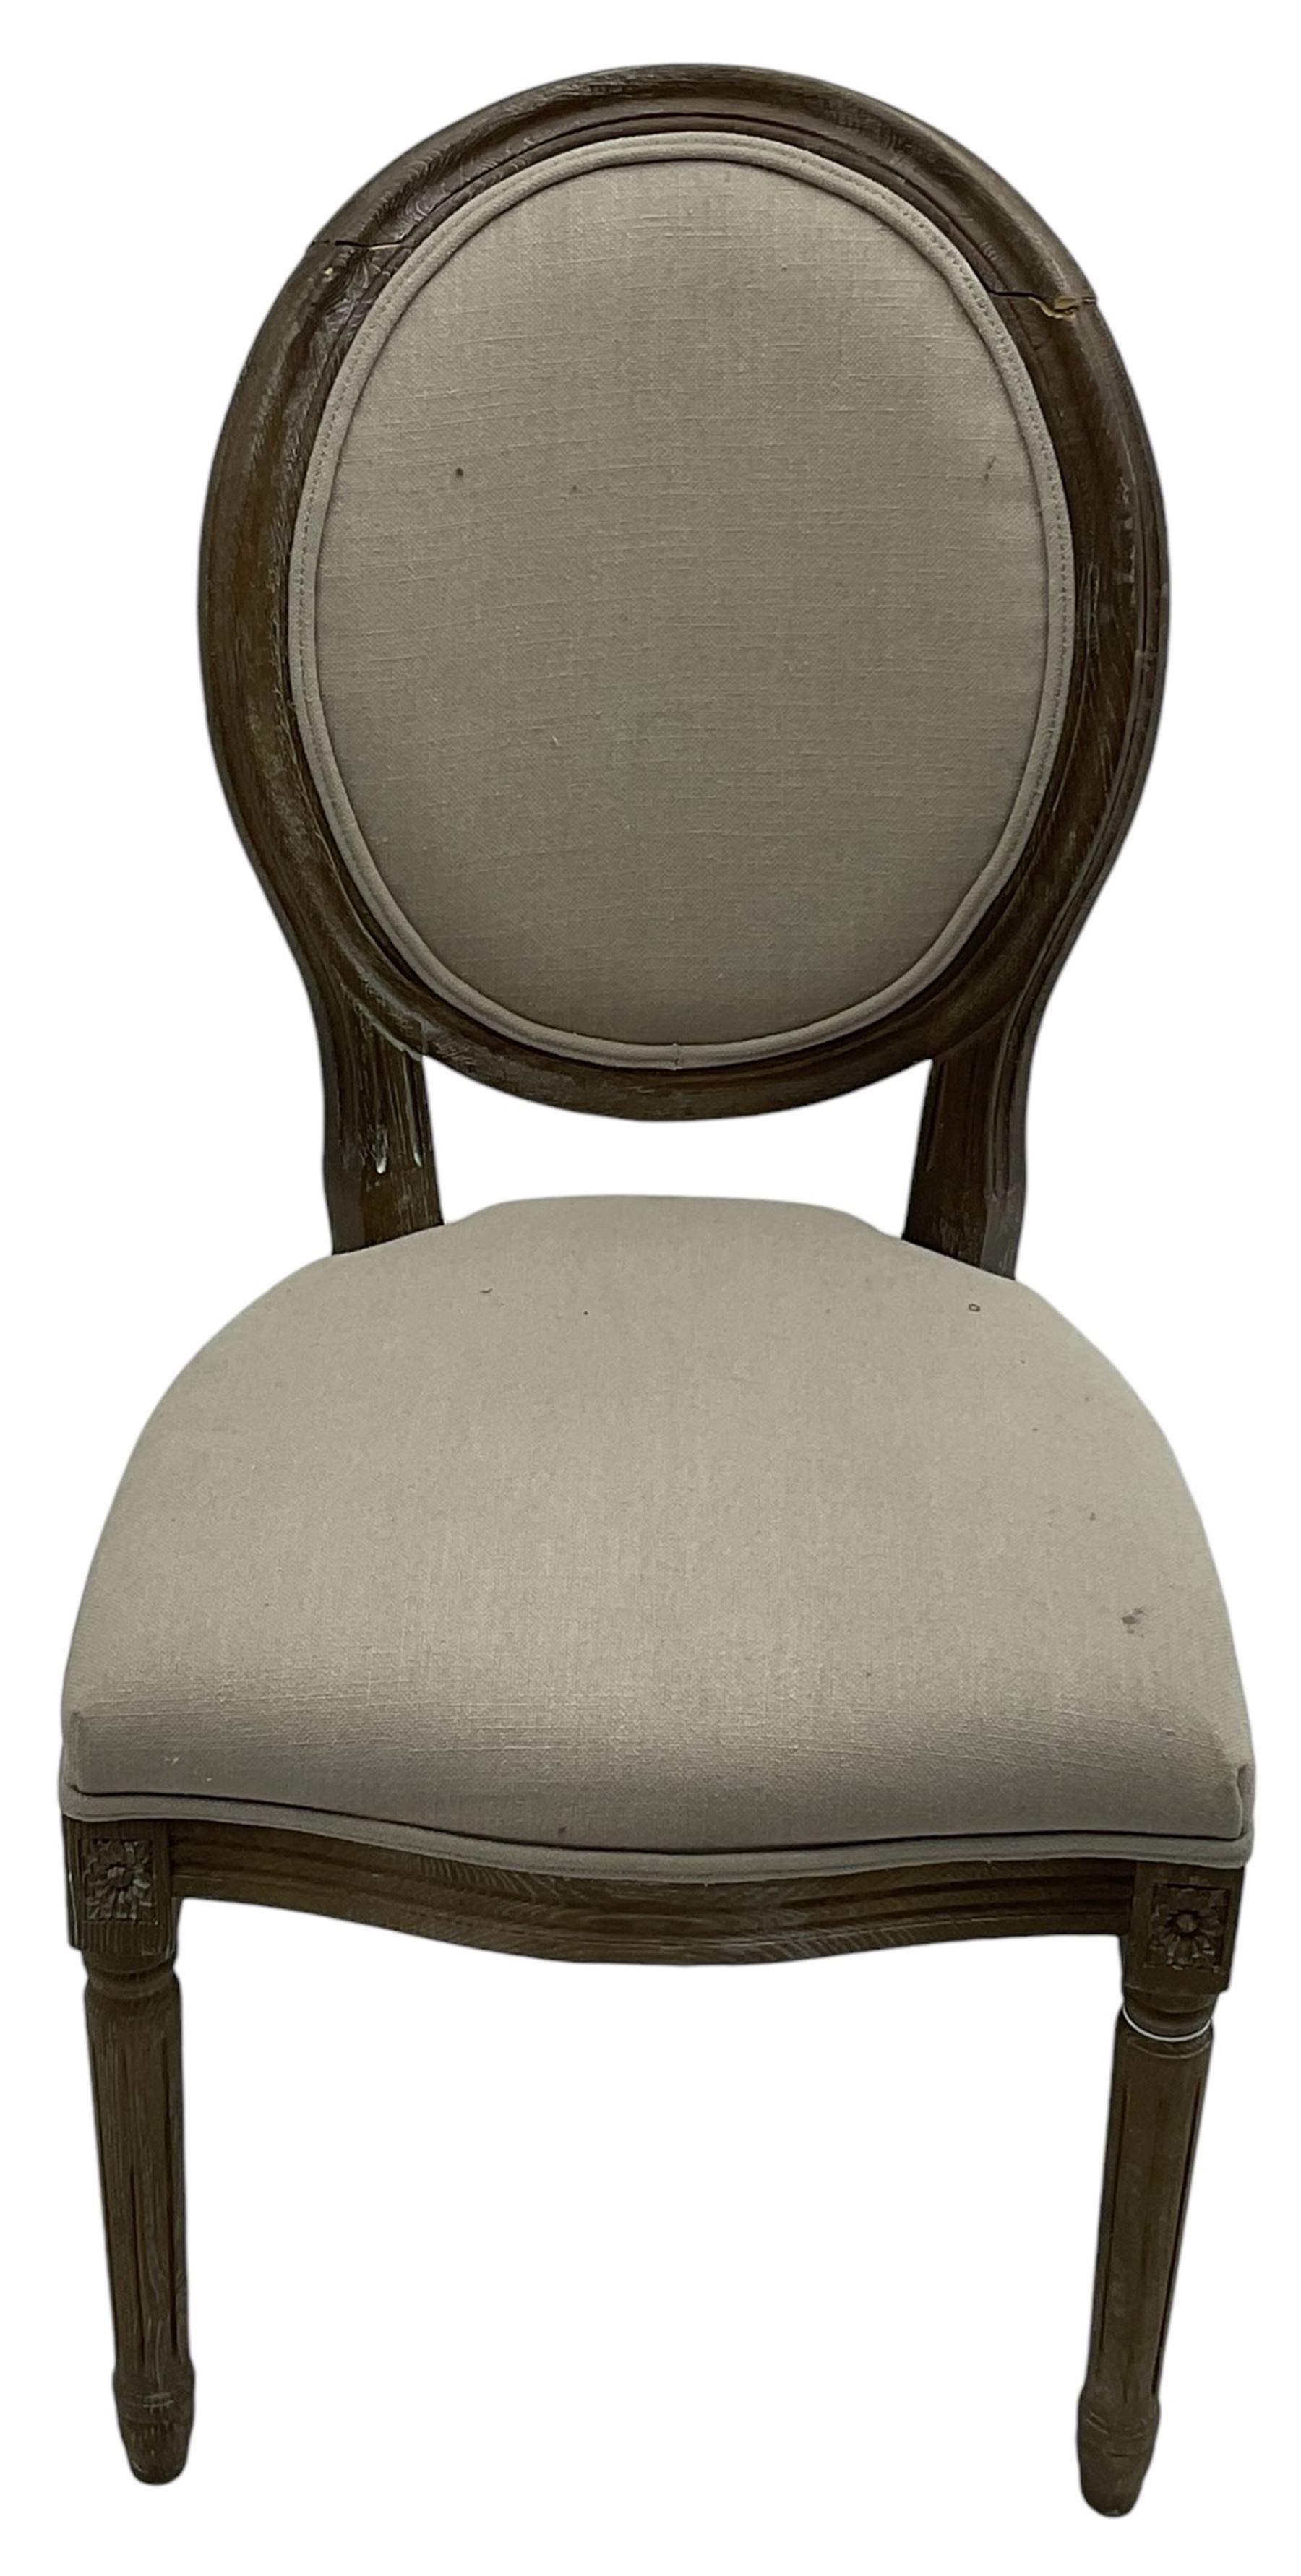 India Jane Interiors - two French design oak side chairs - Image 5 of 13